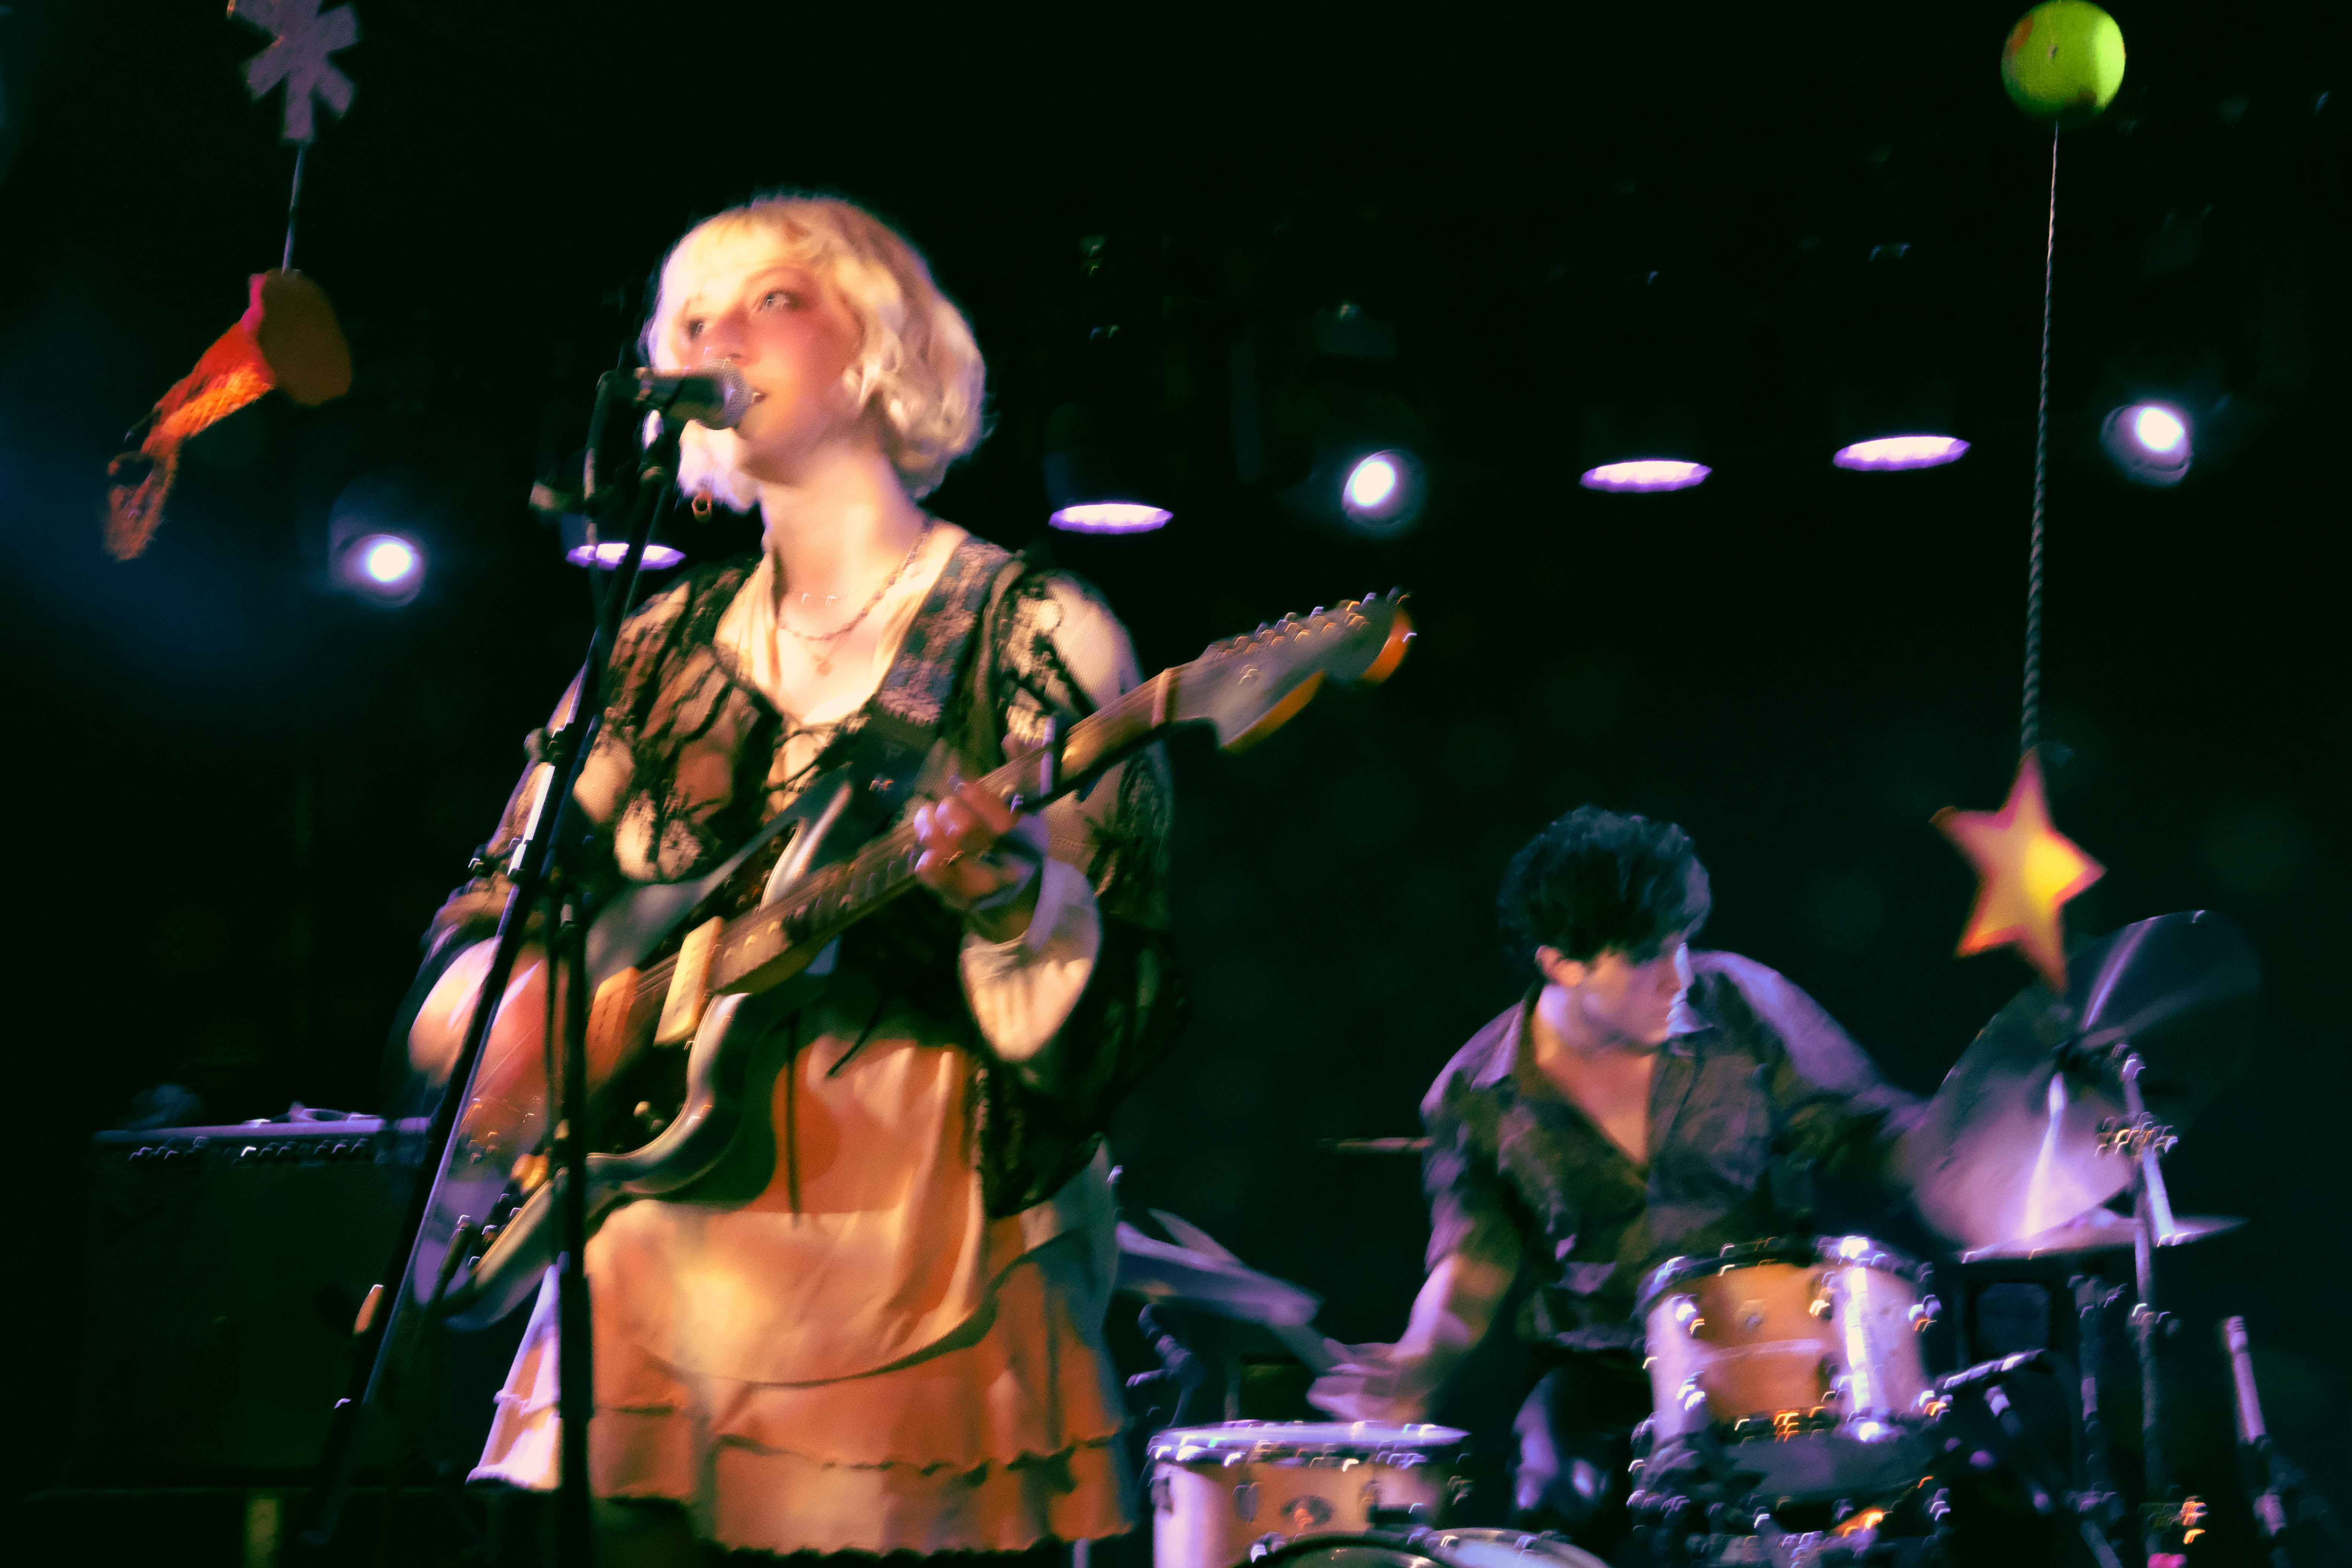 Live Review and Q&A: Trophy Wife at The Mercury Lounge